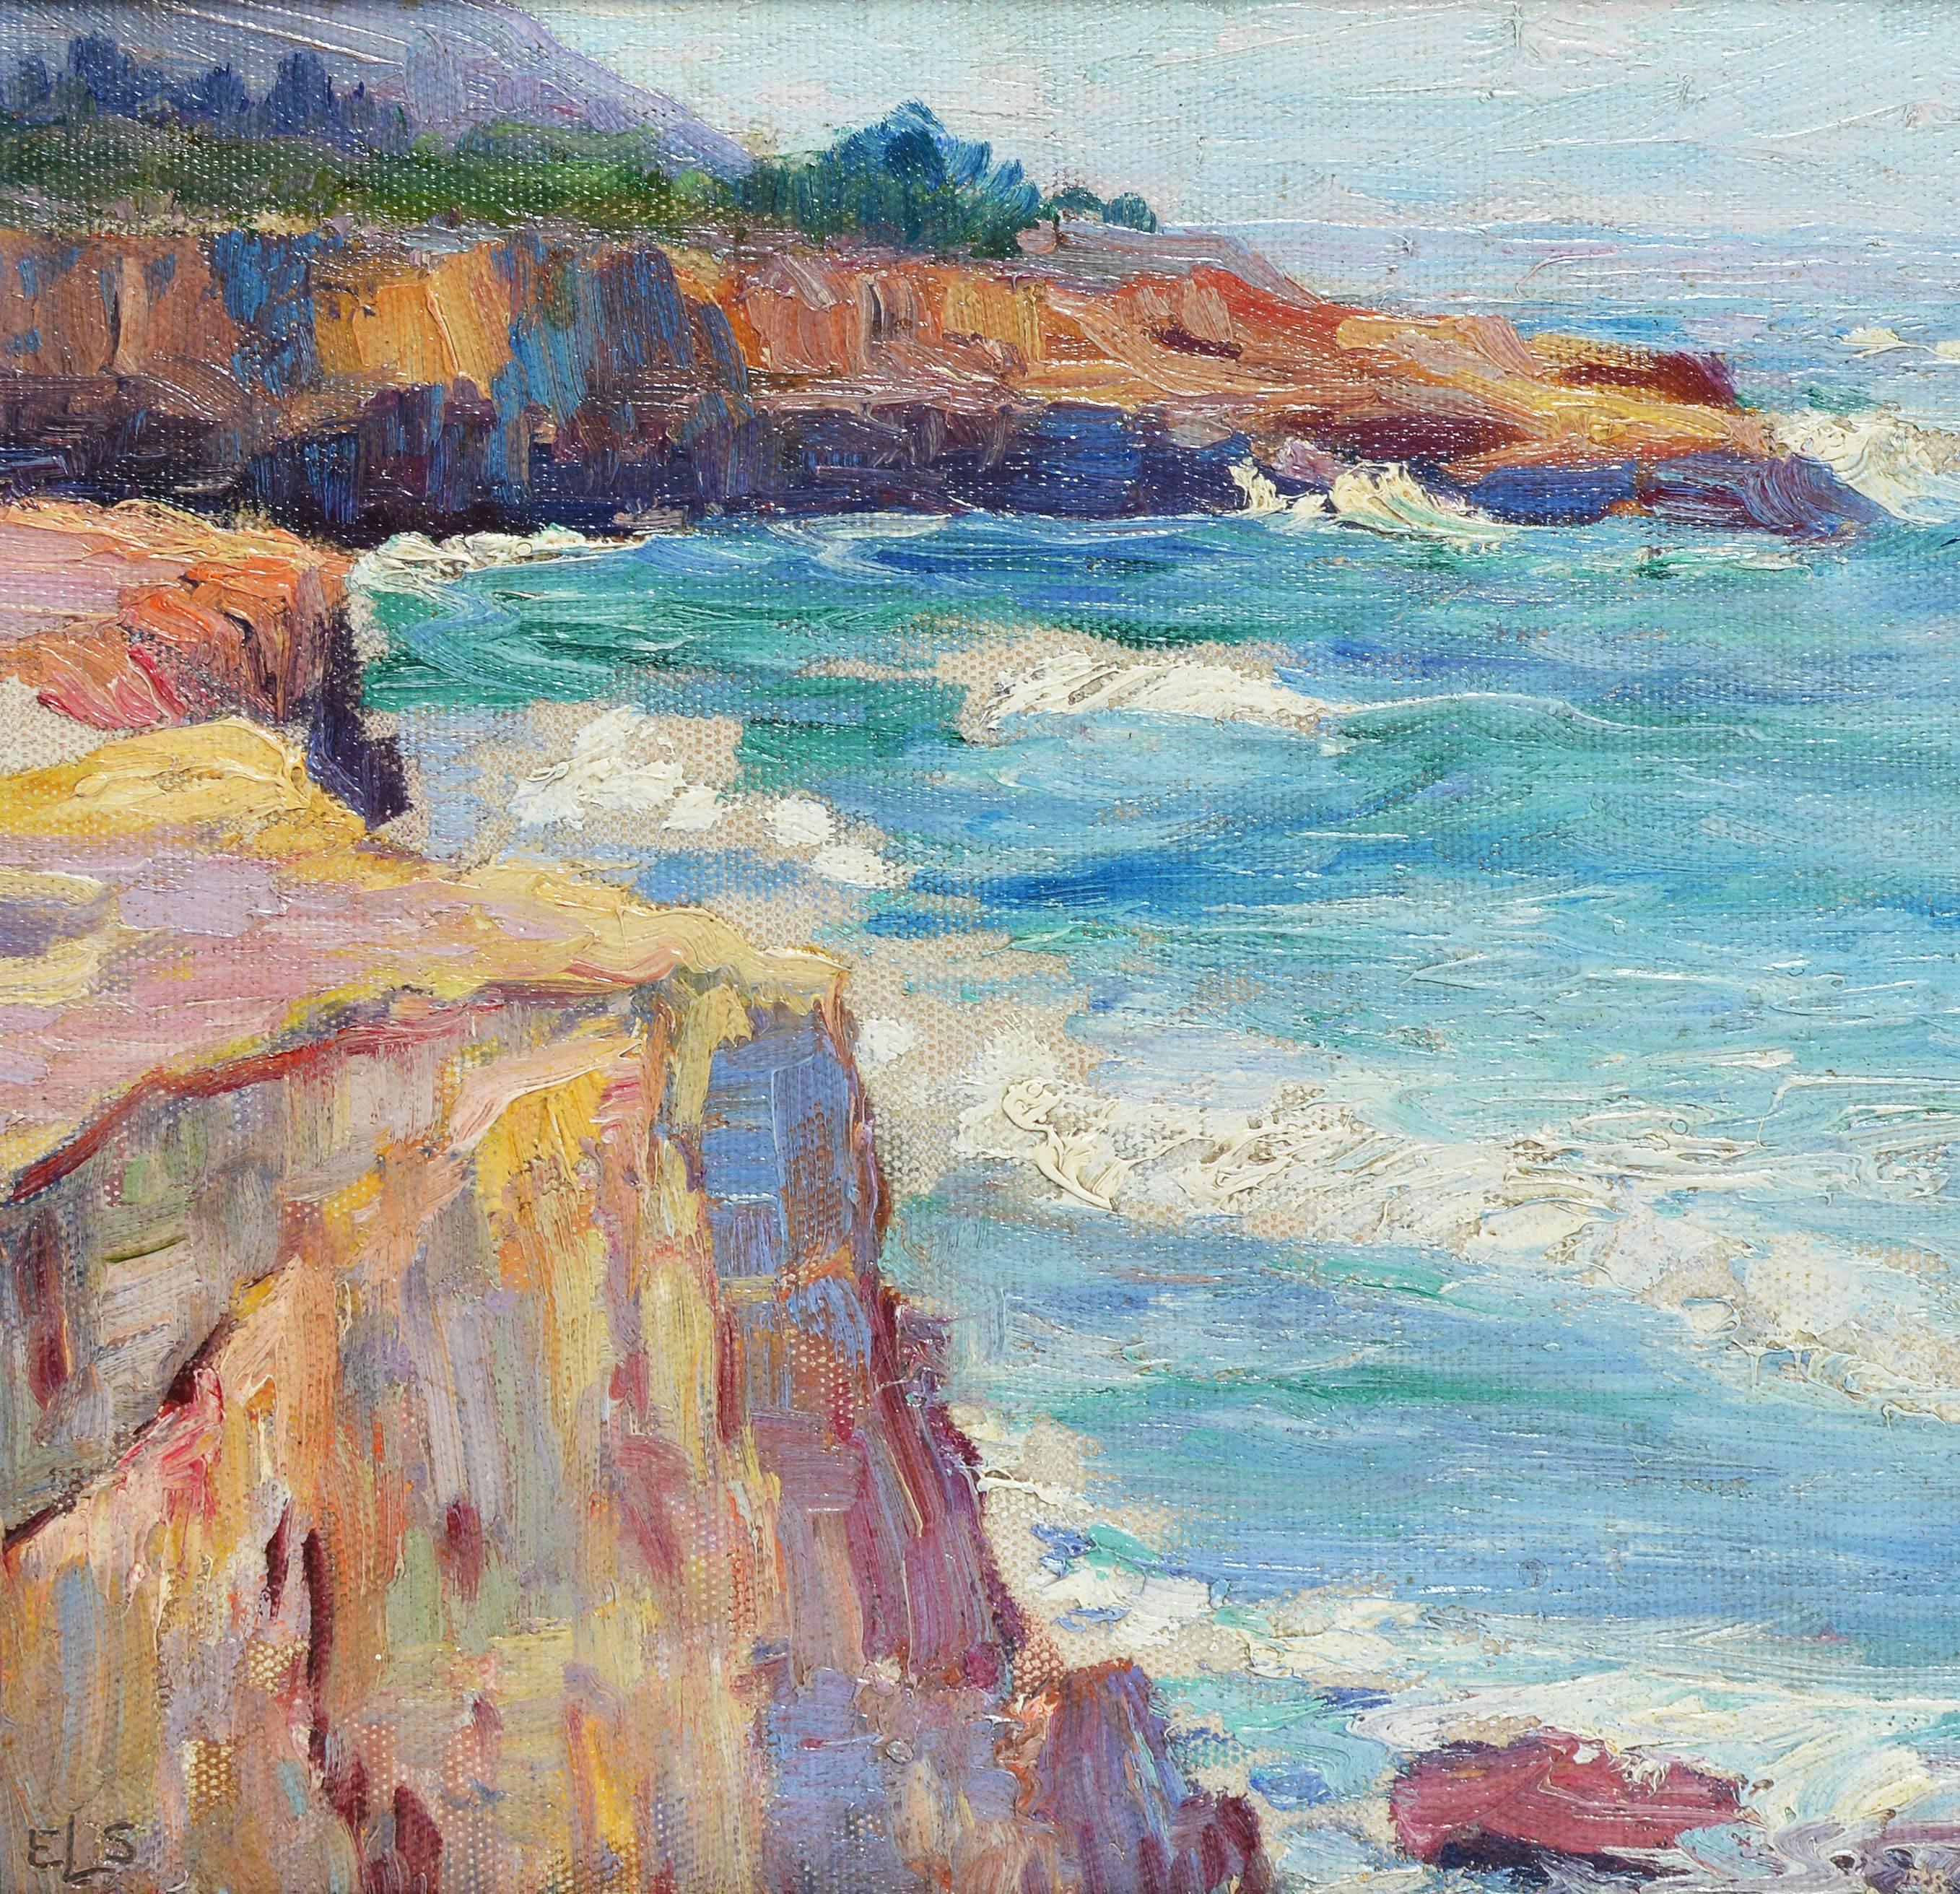 Impressionist coastal seascape of the Point Loma Cliffs.  Oil on board, circa 1930.  Signed lower left, "ELS".  Displayed in a giltwood frame.  Image size 14"L  x 11"H, overall 15.5"L x 12.5"H.